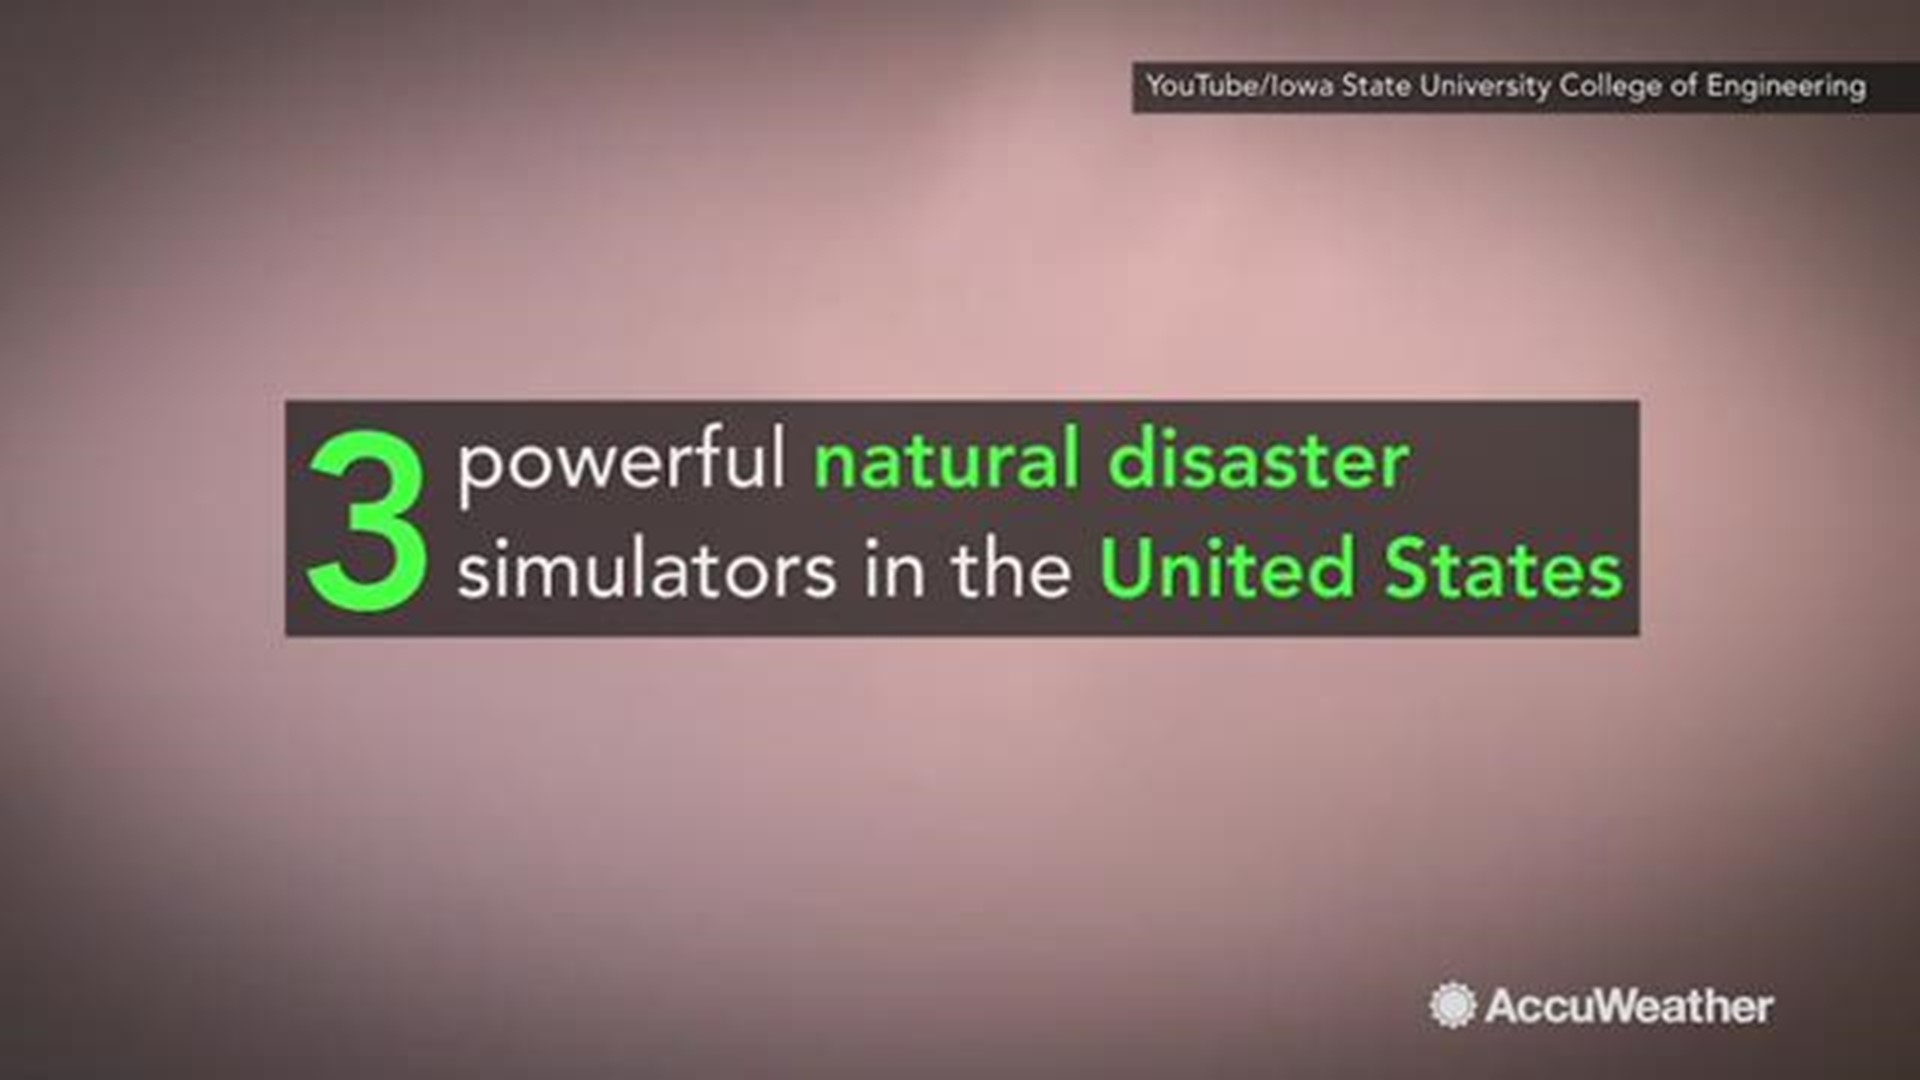 The United States is home to a number of simulators that recreate the extraordinary effects of natural disasters. These help us build more resilient communities.